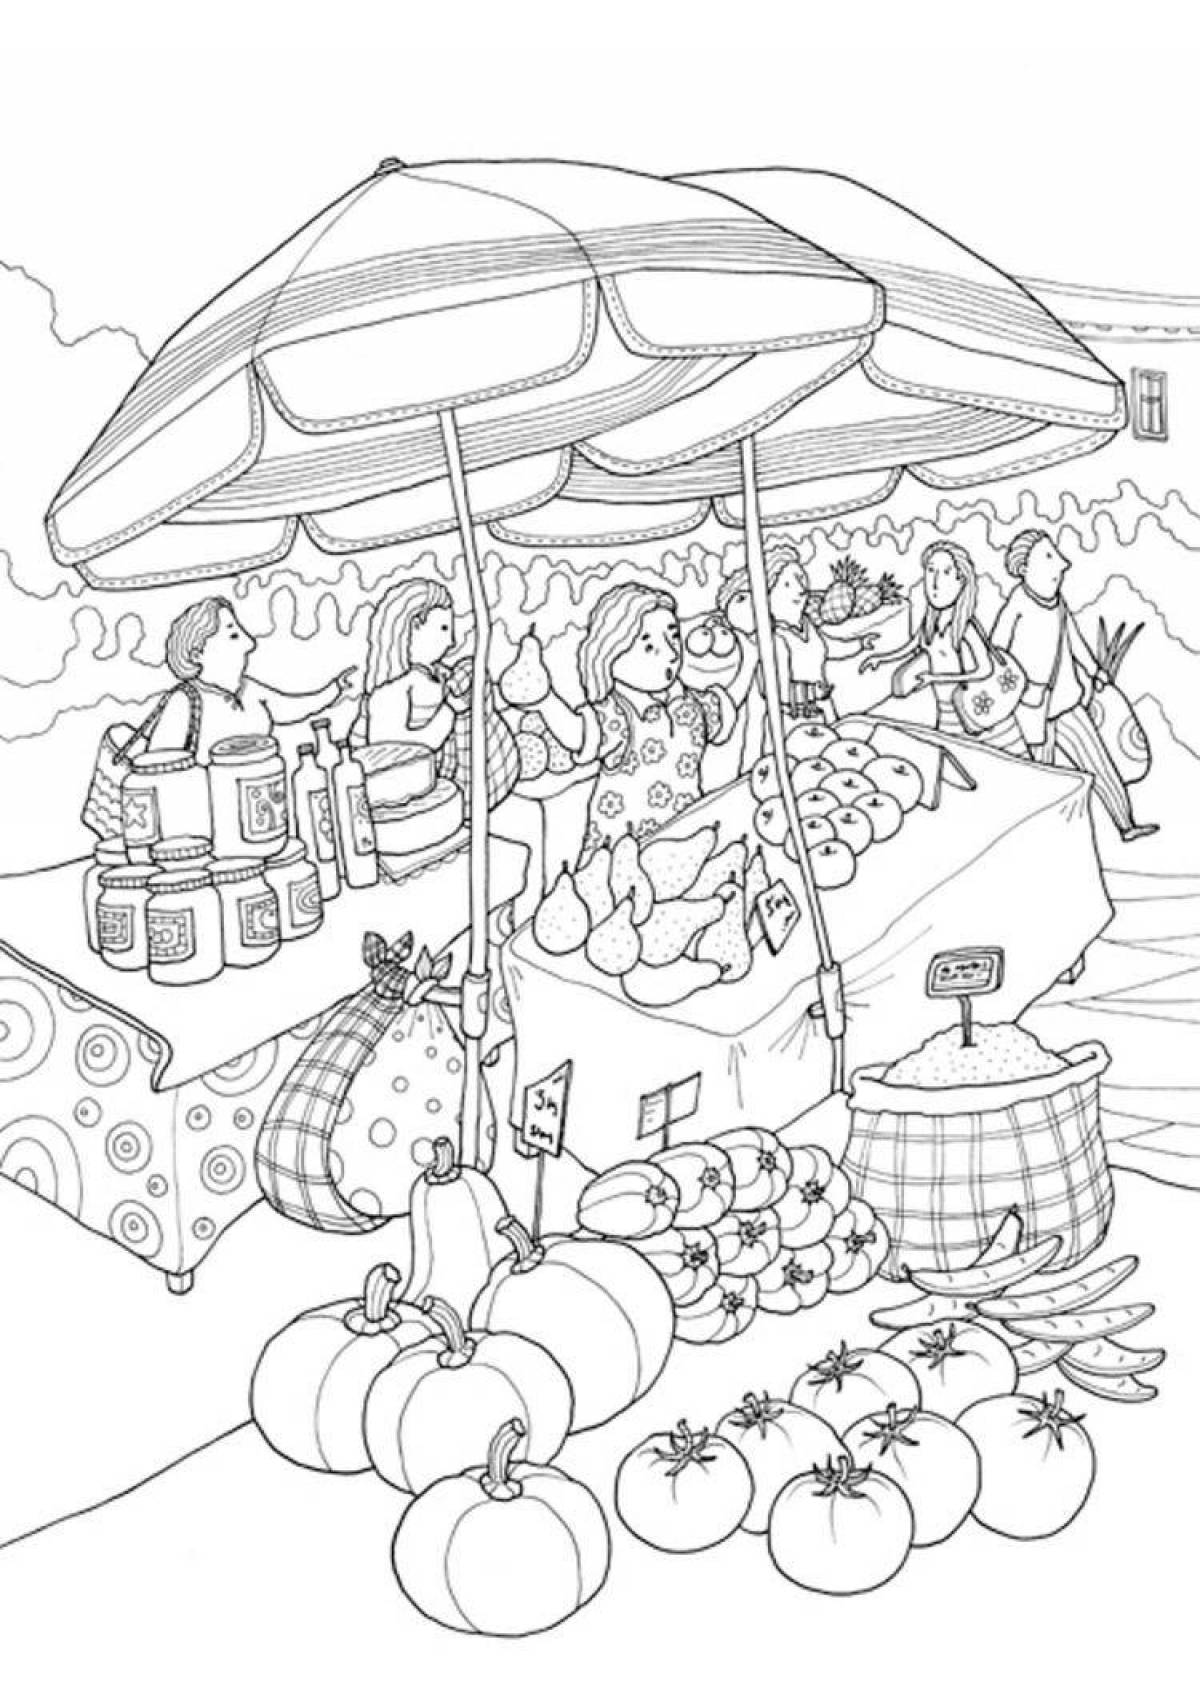 Coloring page tempting journey